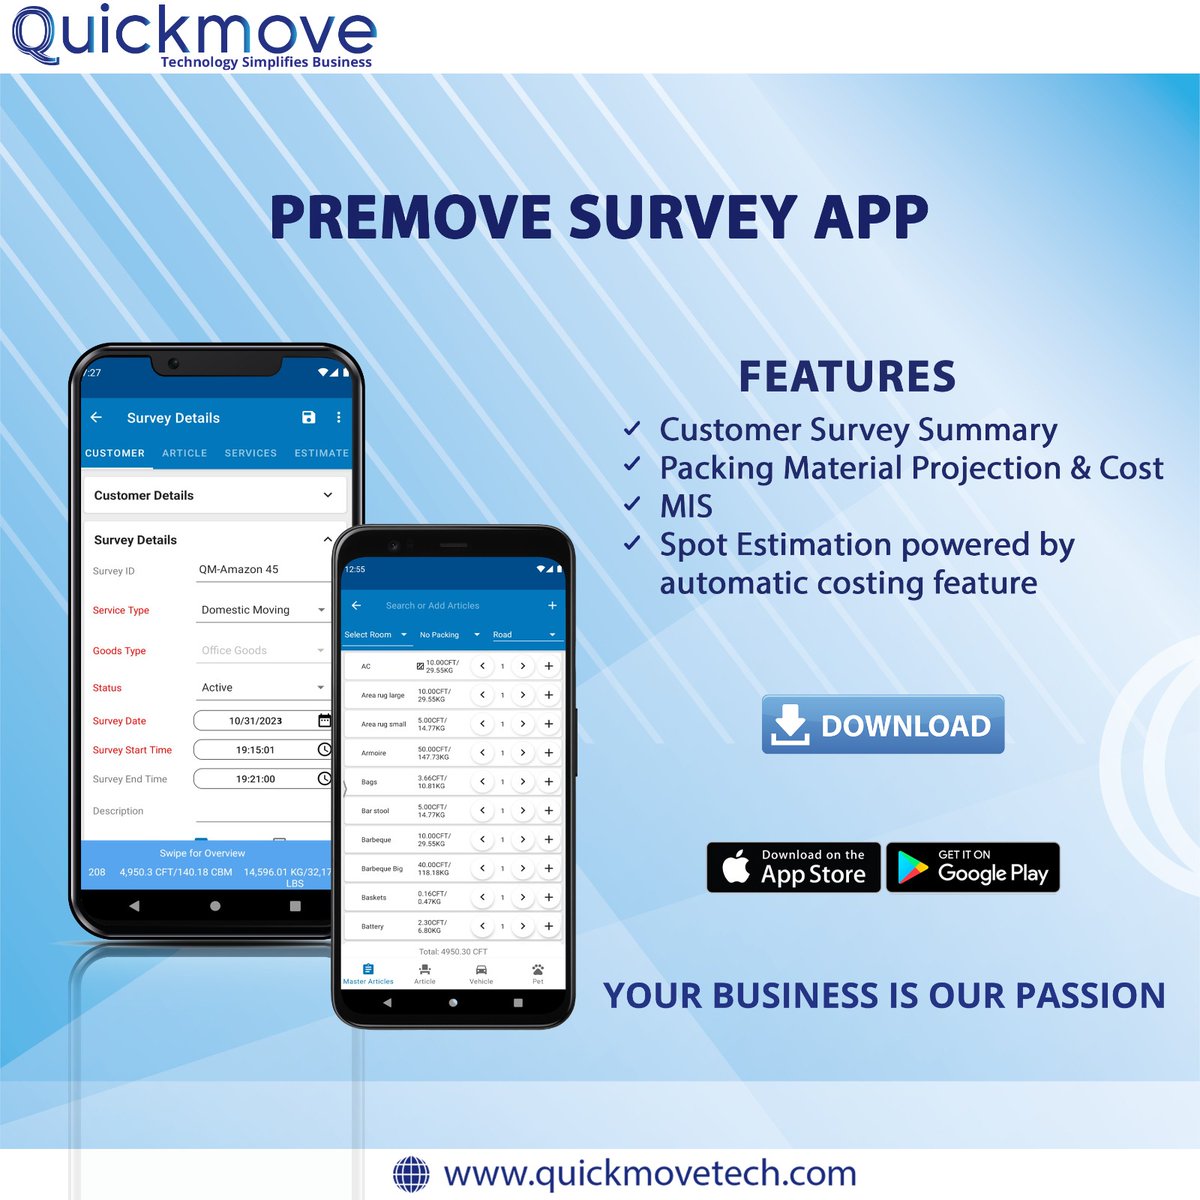 Streamlining relocation with a user-friendly mobile app for efficient pre-move assessments and planning.
#QuickMove #QuickMoveTEchnologies #PreMoveSurvey #MovingInspection #MovePrep #SurveyBeforeYouMove
#MovingChecklist #SmoothMove #HomeTransition
#MovingPreparation